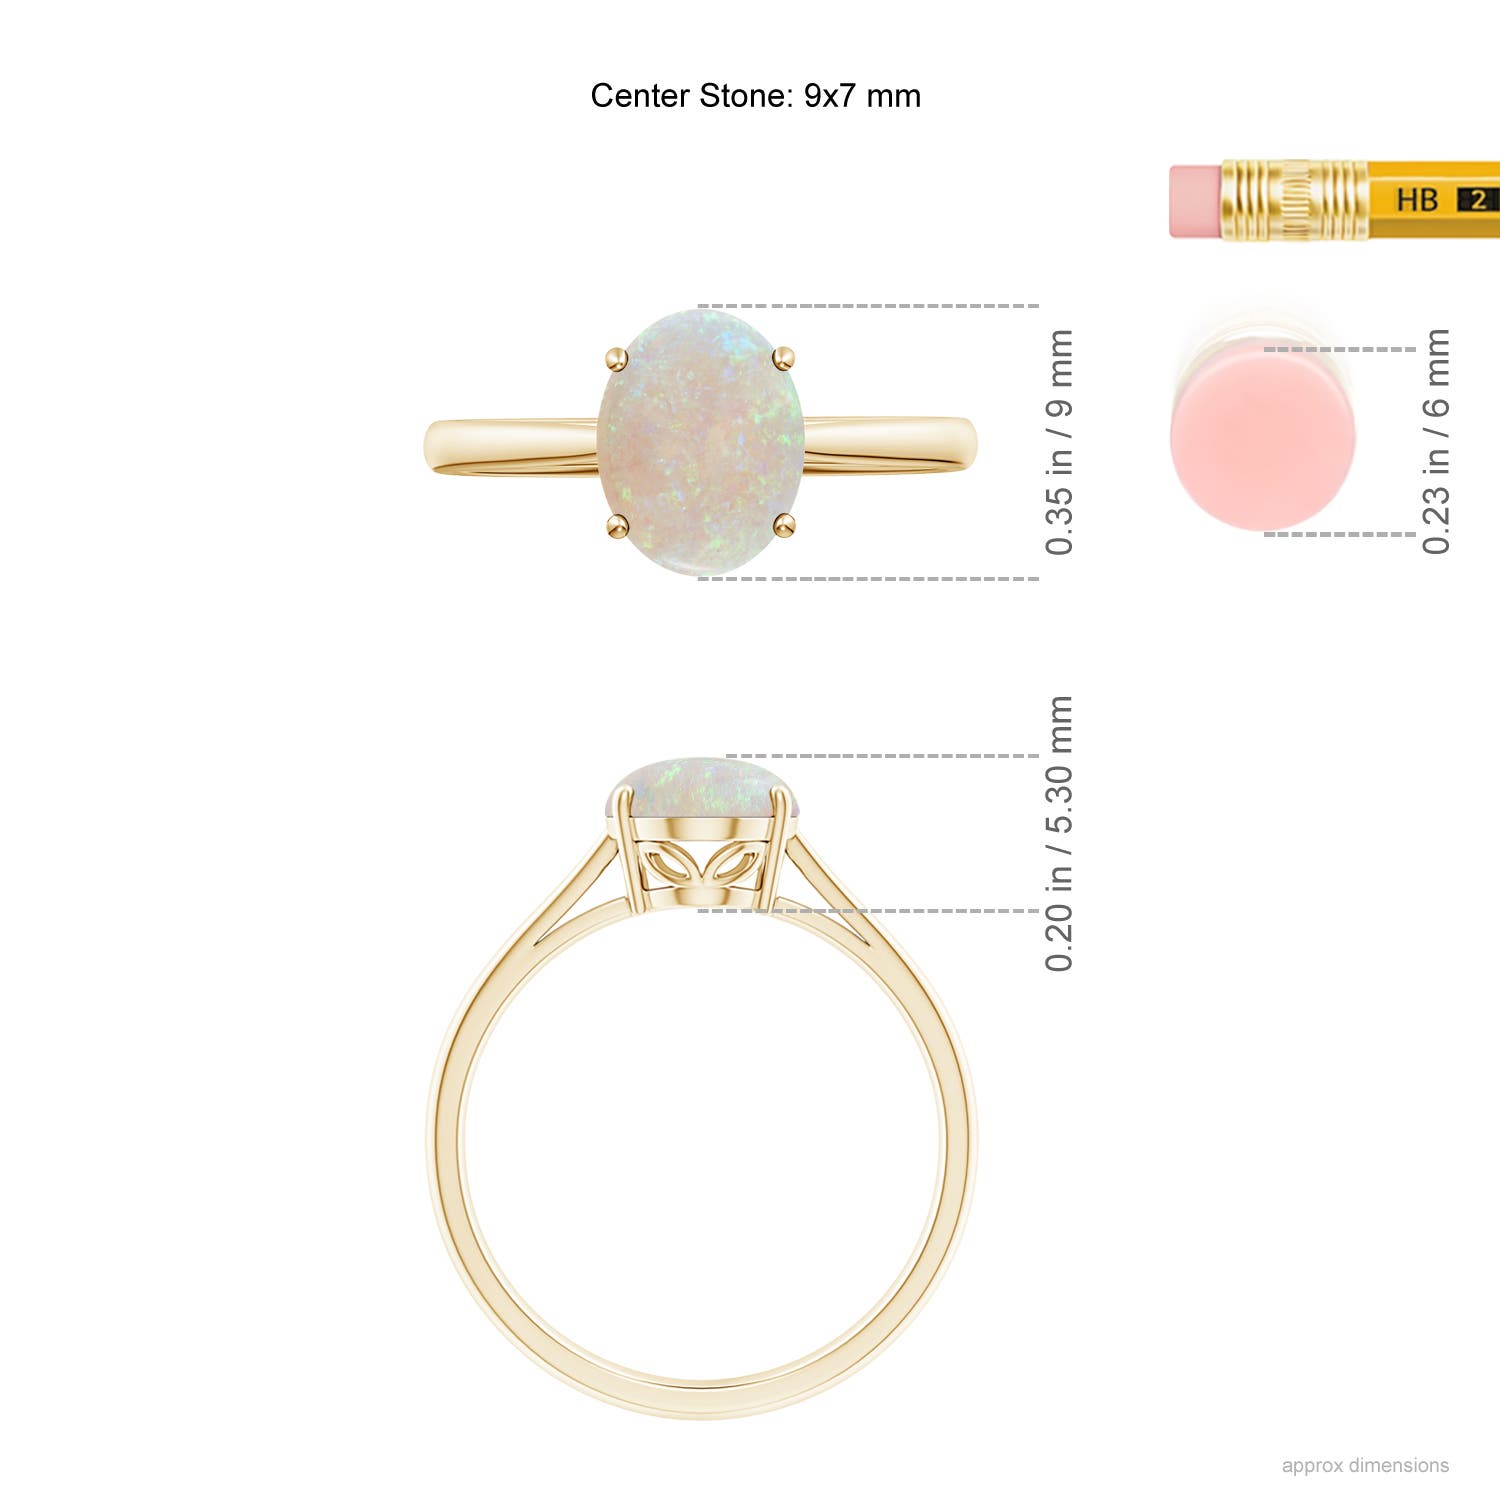 AA - Opal / 1.1 CT / 14 KT Yellow Gold